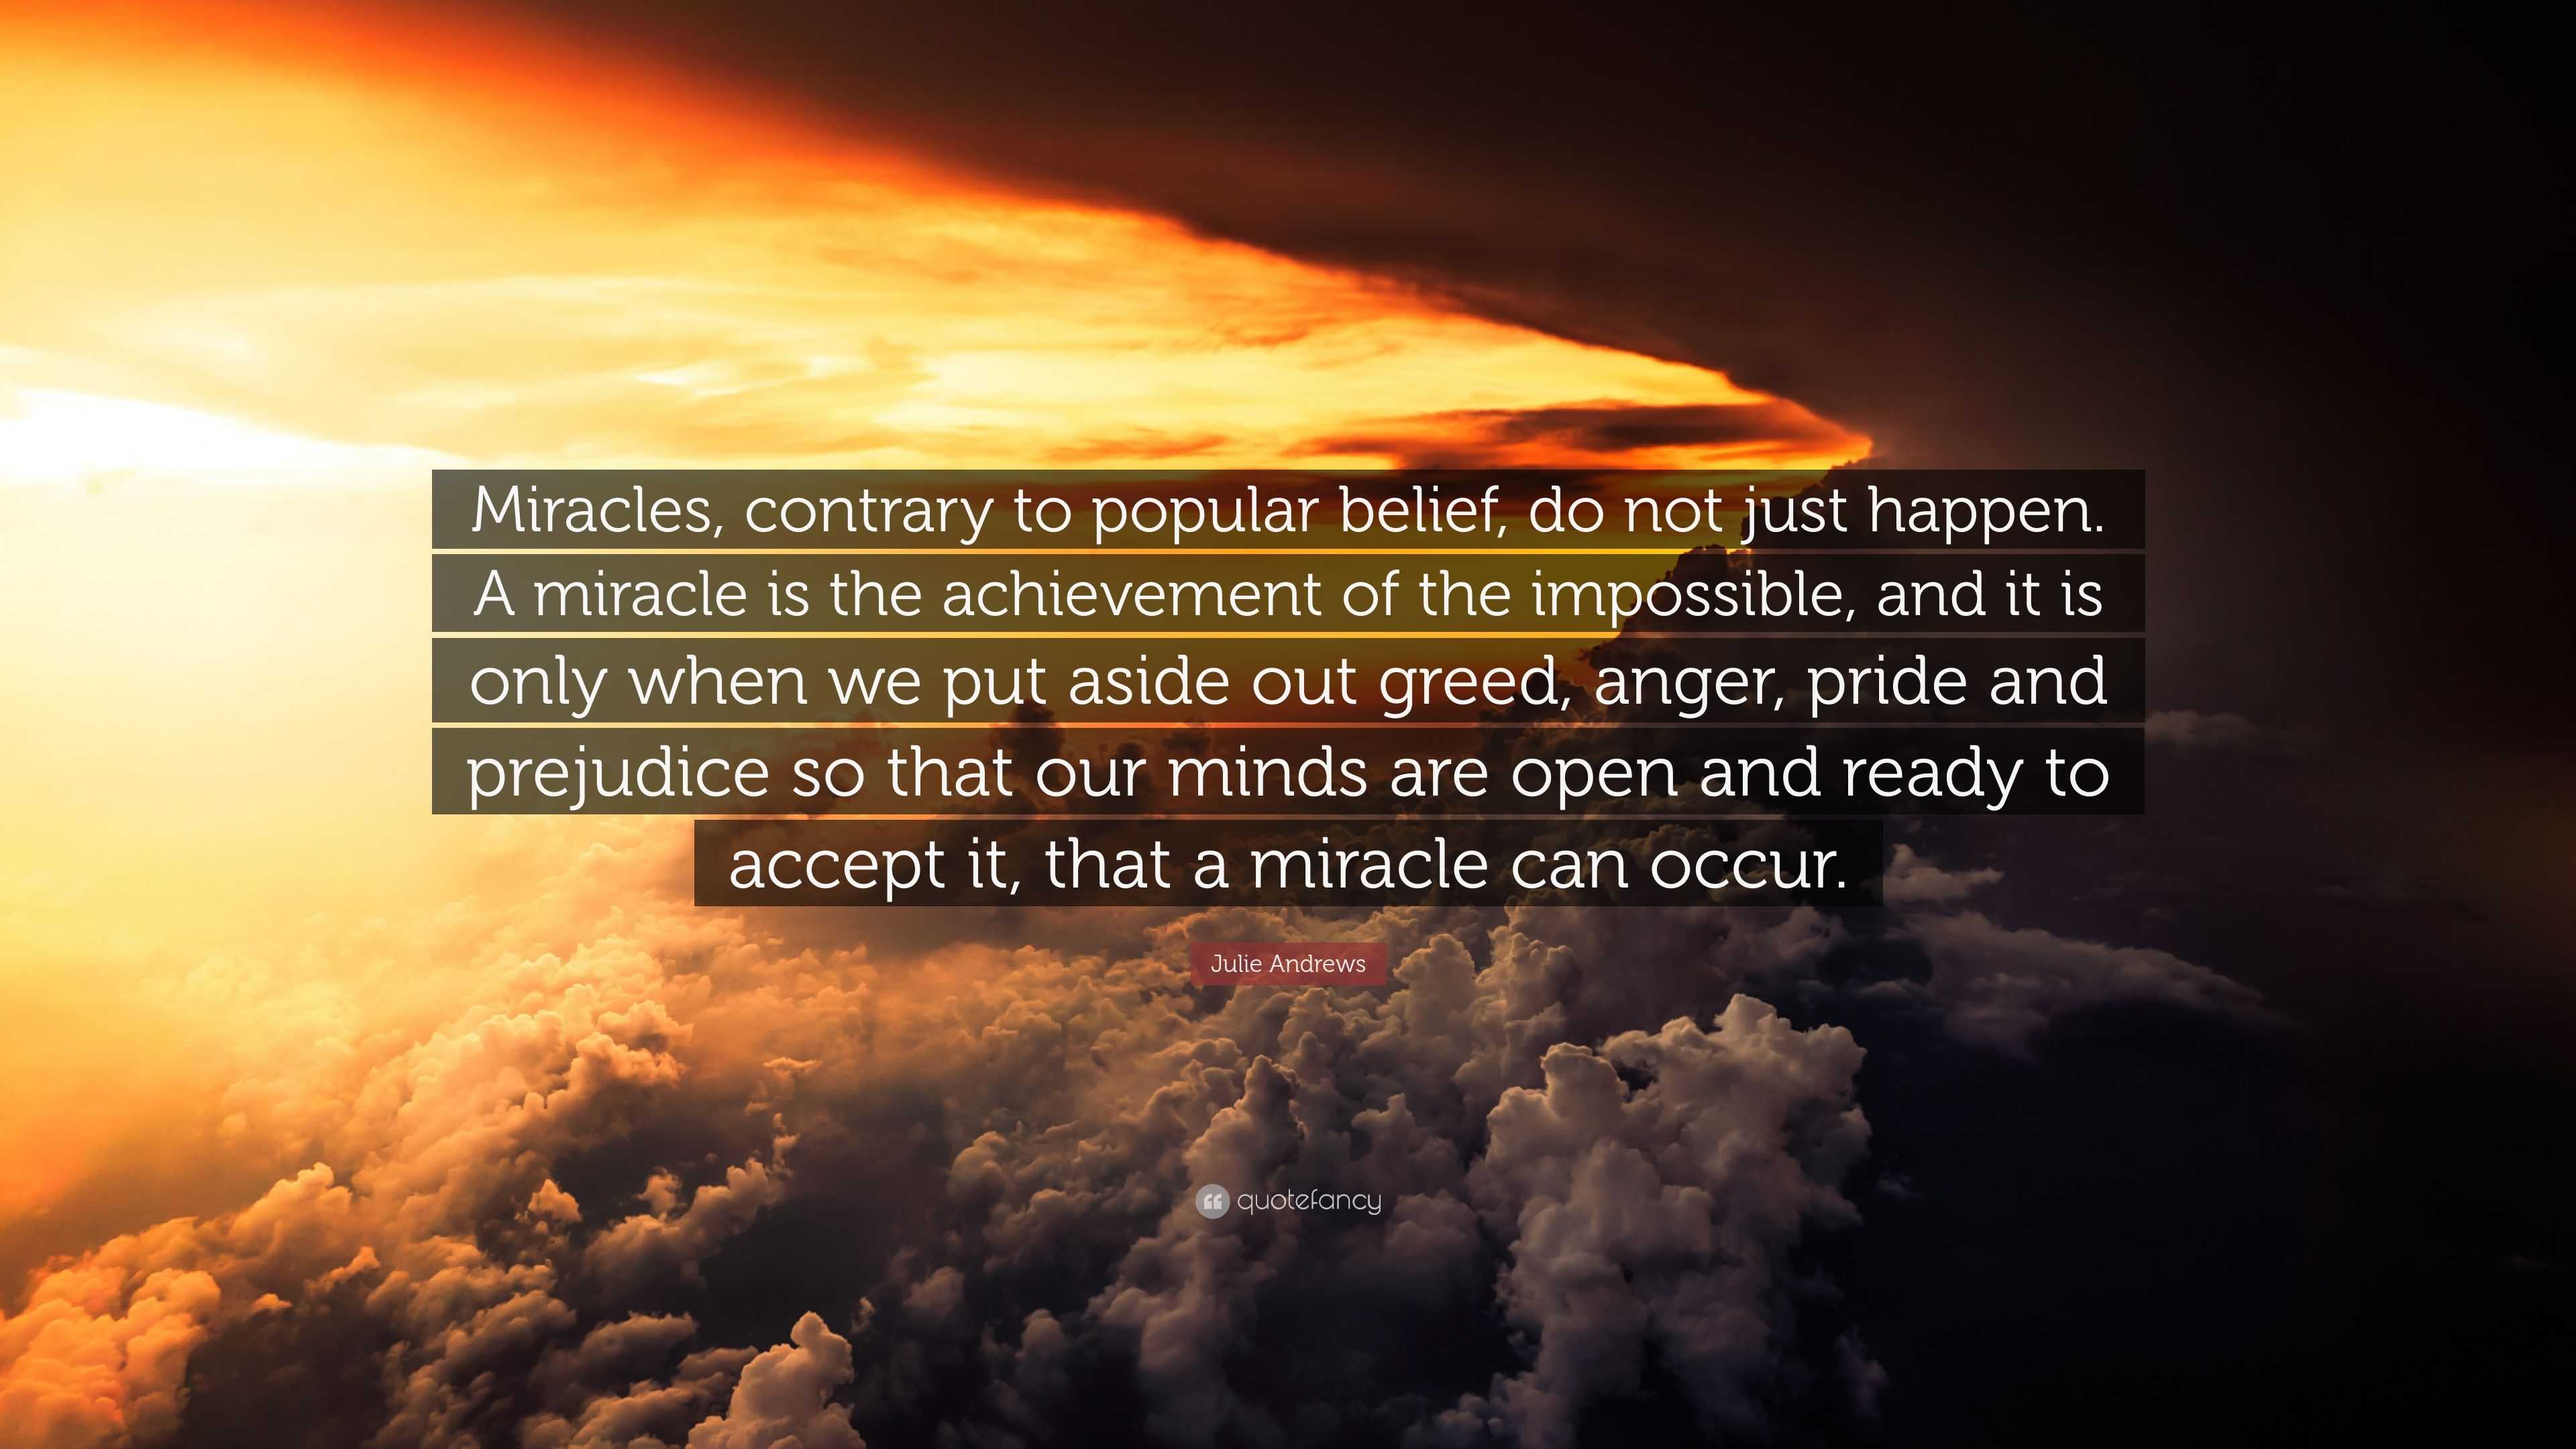 Julie Andrews Quote: “Miracles, contrary to popular belief, do not just